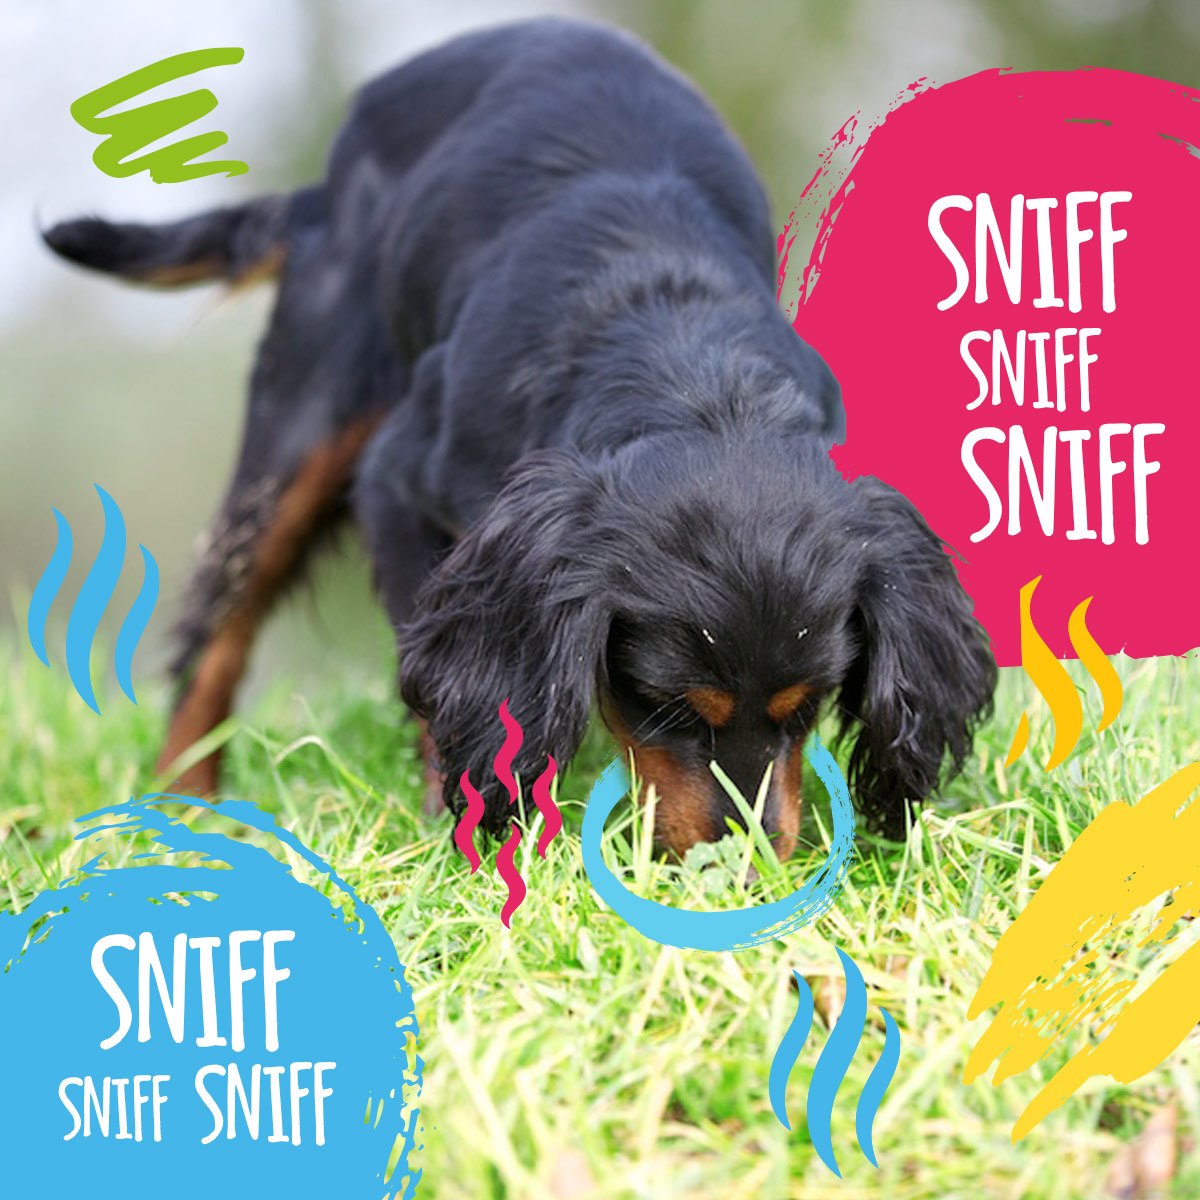 Indoor Scent Games For Dogs: Stimulate Senses While Stuck Inside